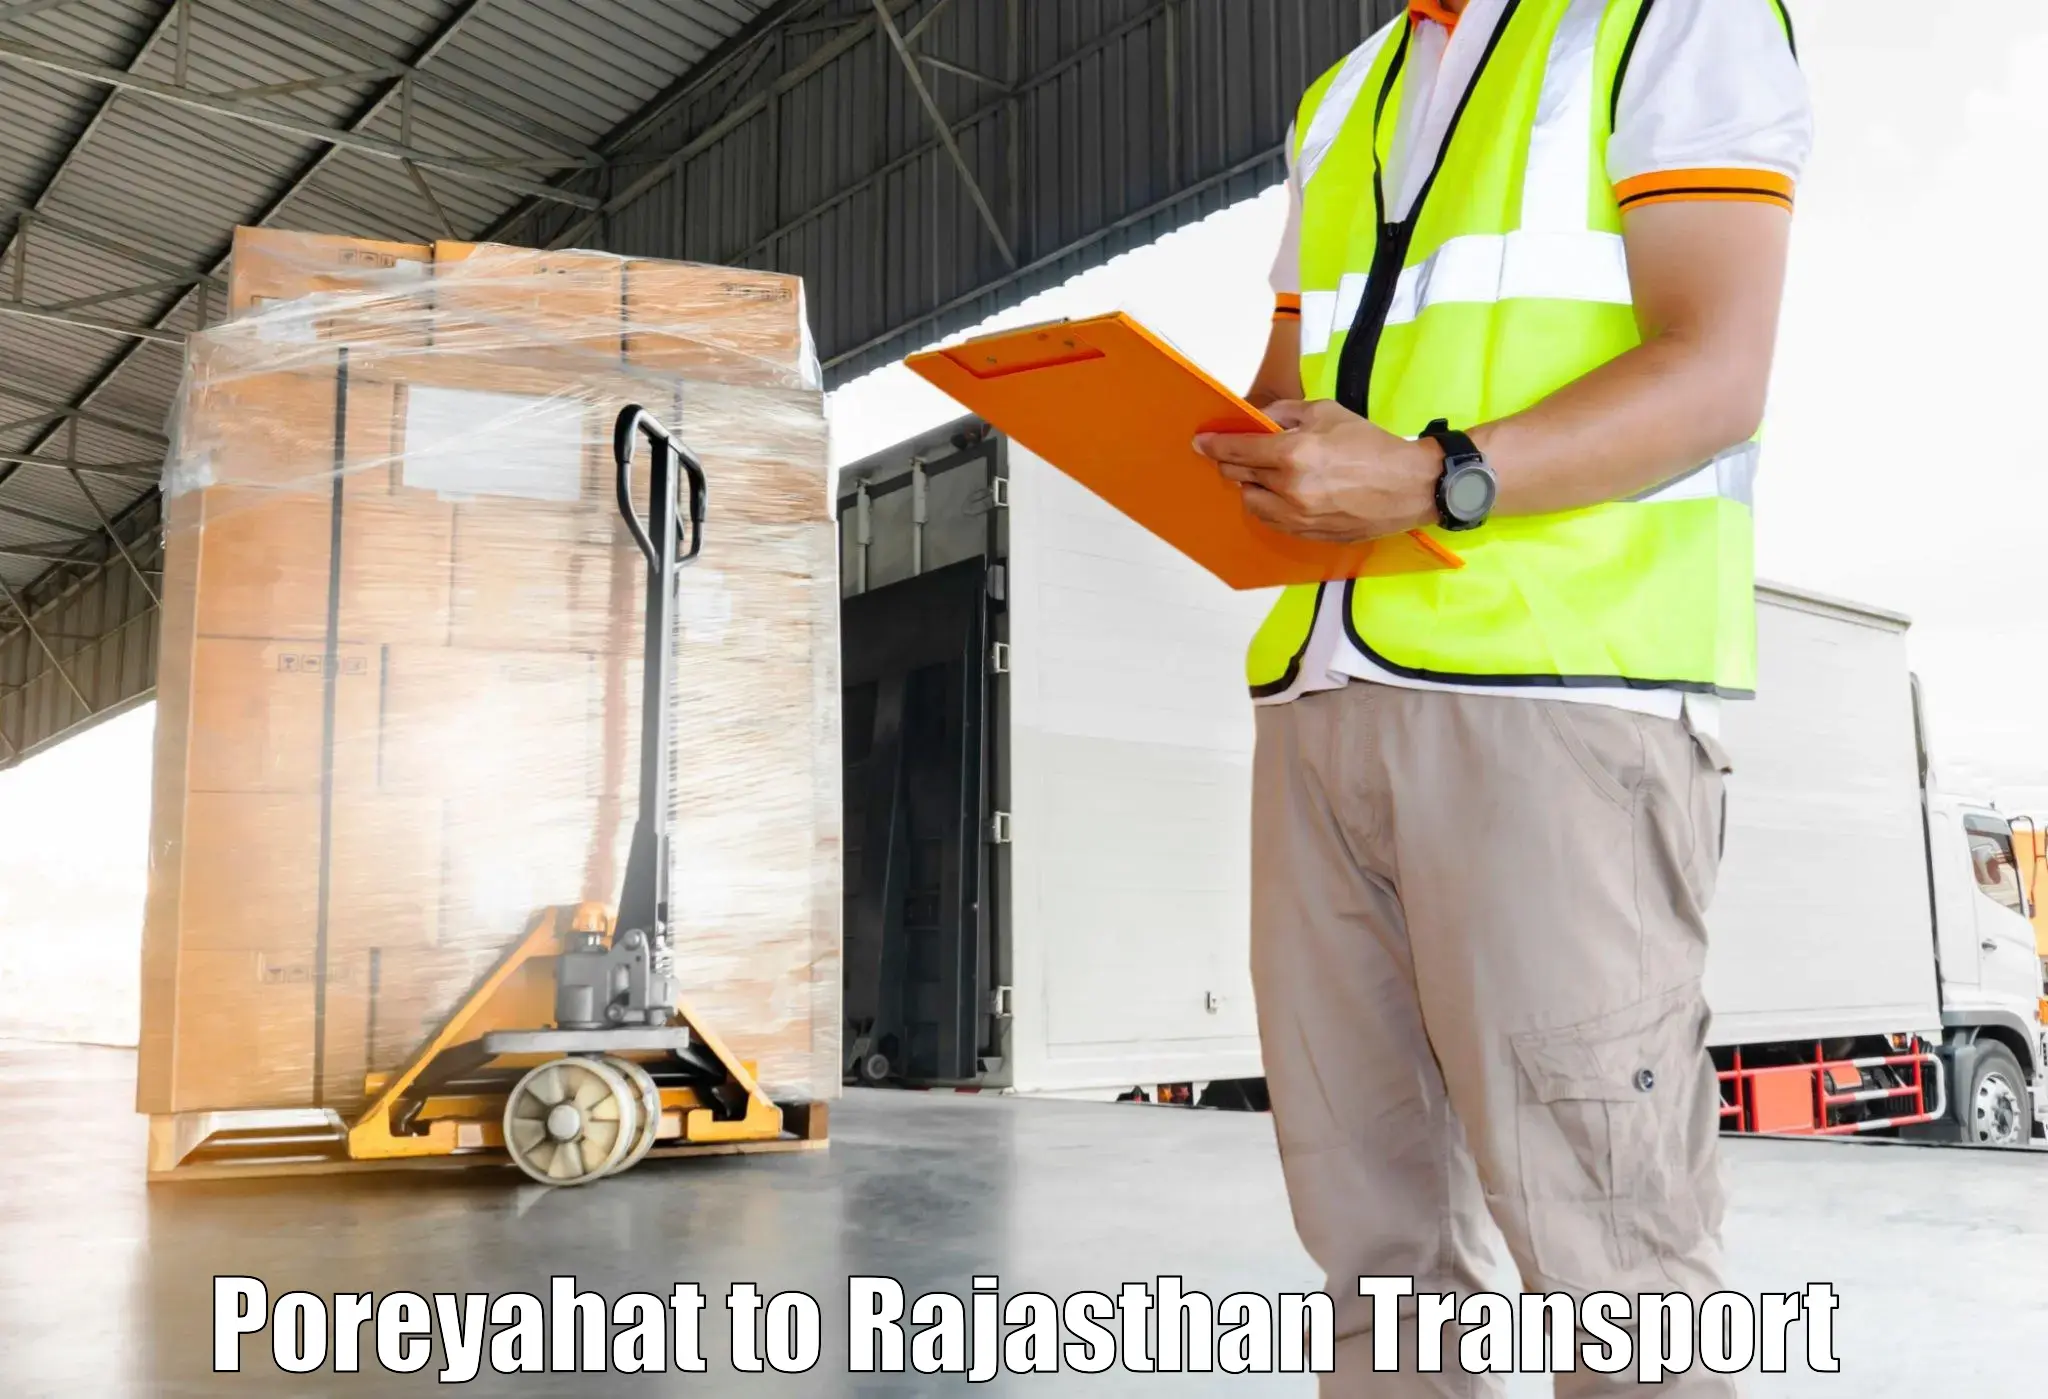 Truck transport companies in India in Poreyahat to Lalsot